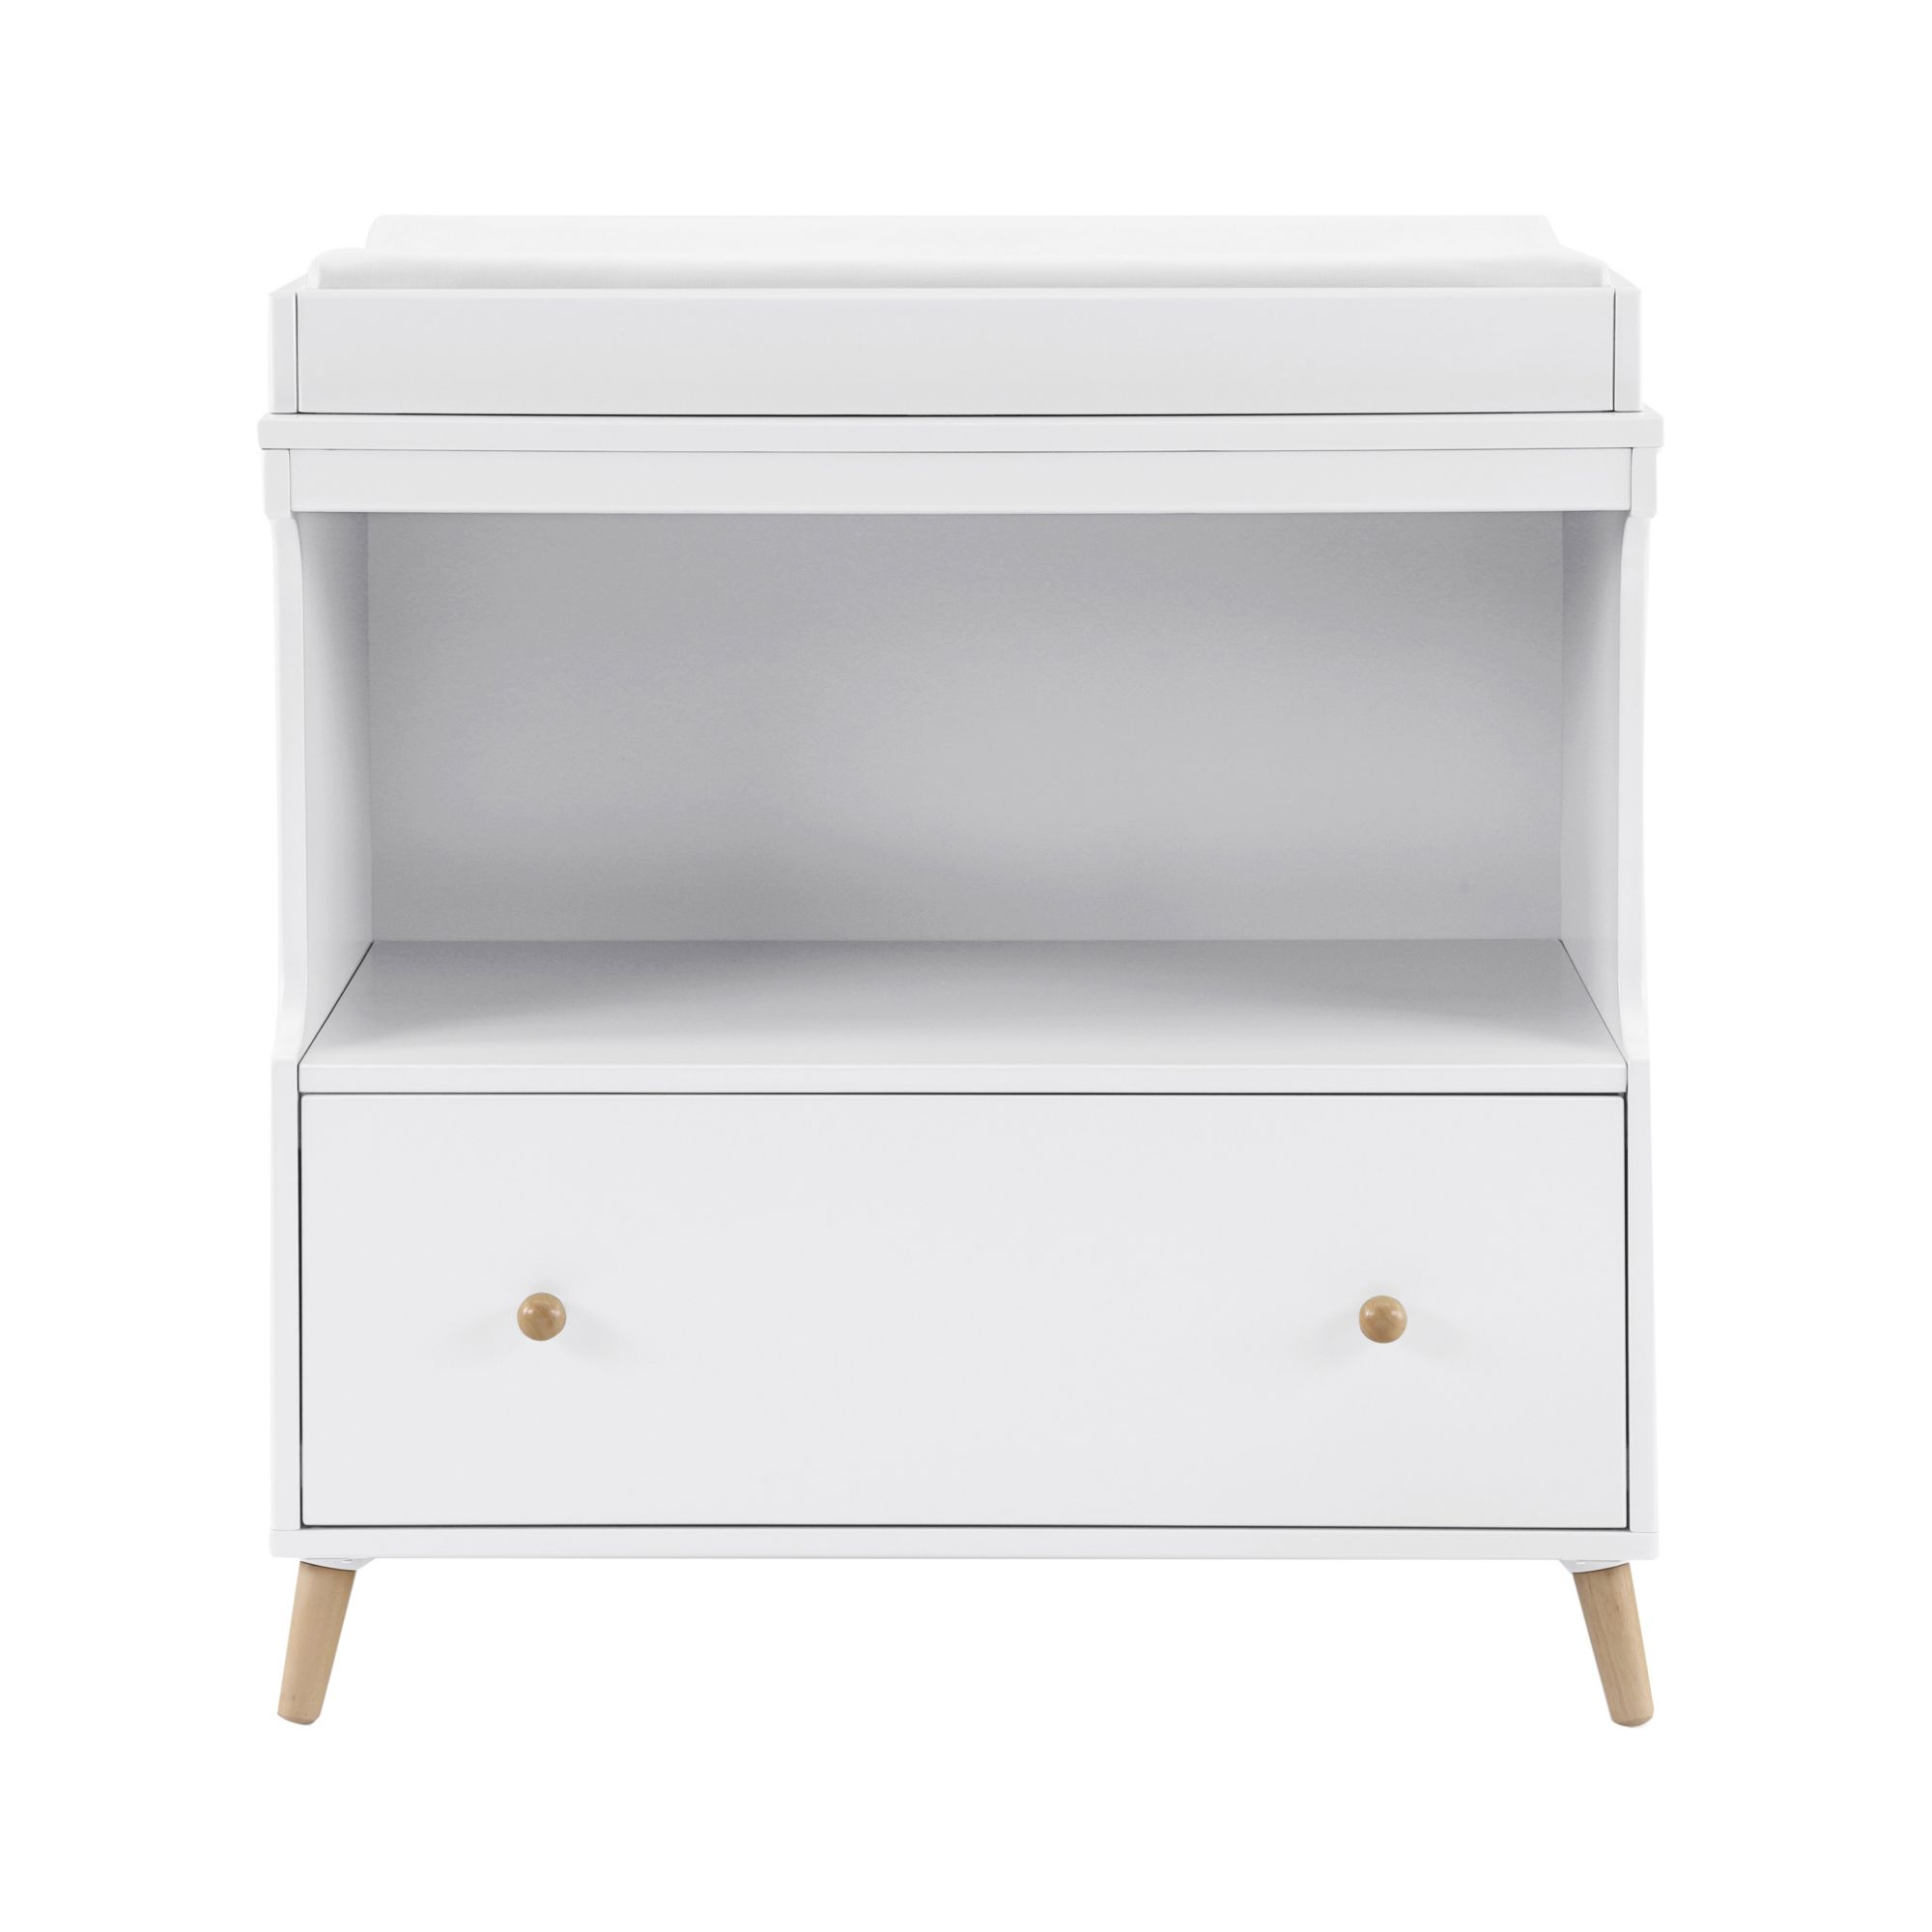 Delta Children Essex Changing Table with Drawer - White with Natural